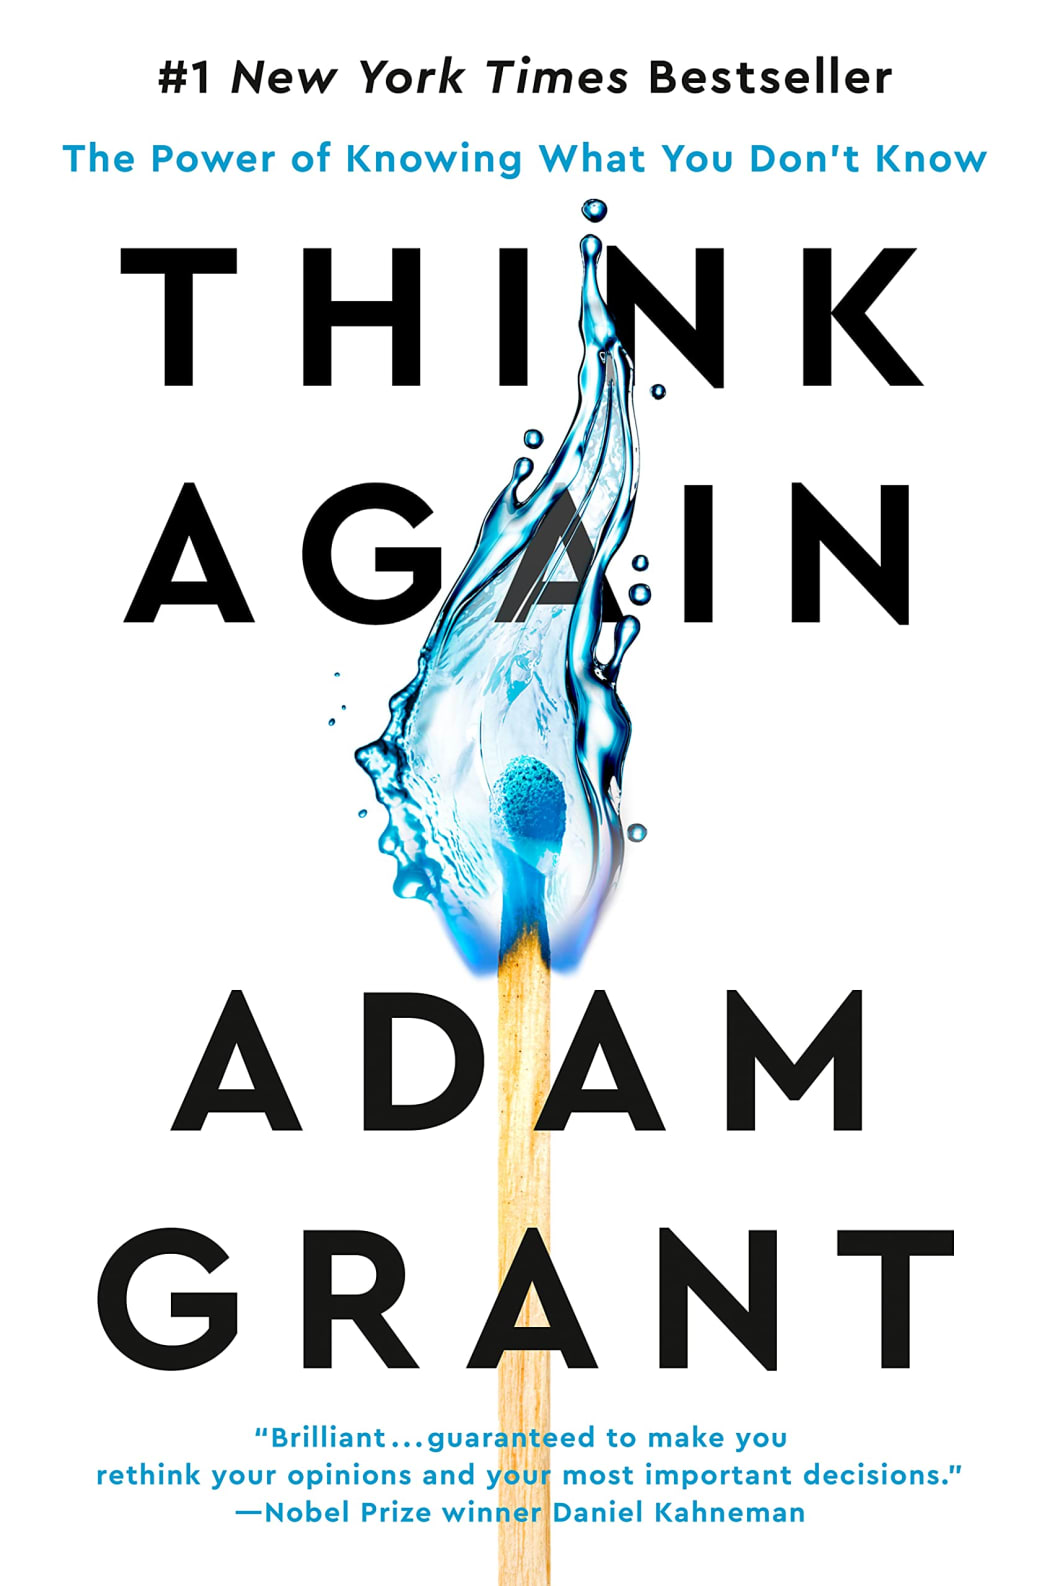 Adam Grant's book THINK AGAIN The Power of Knowing What You Don't Know